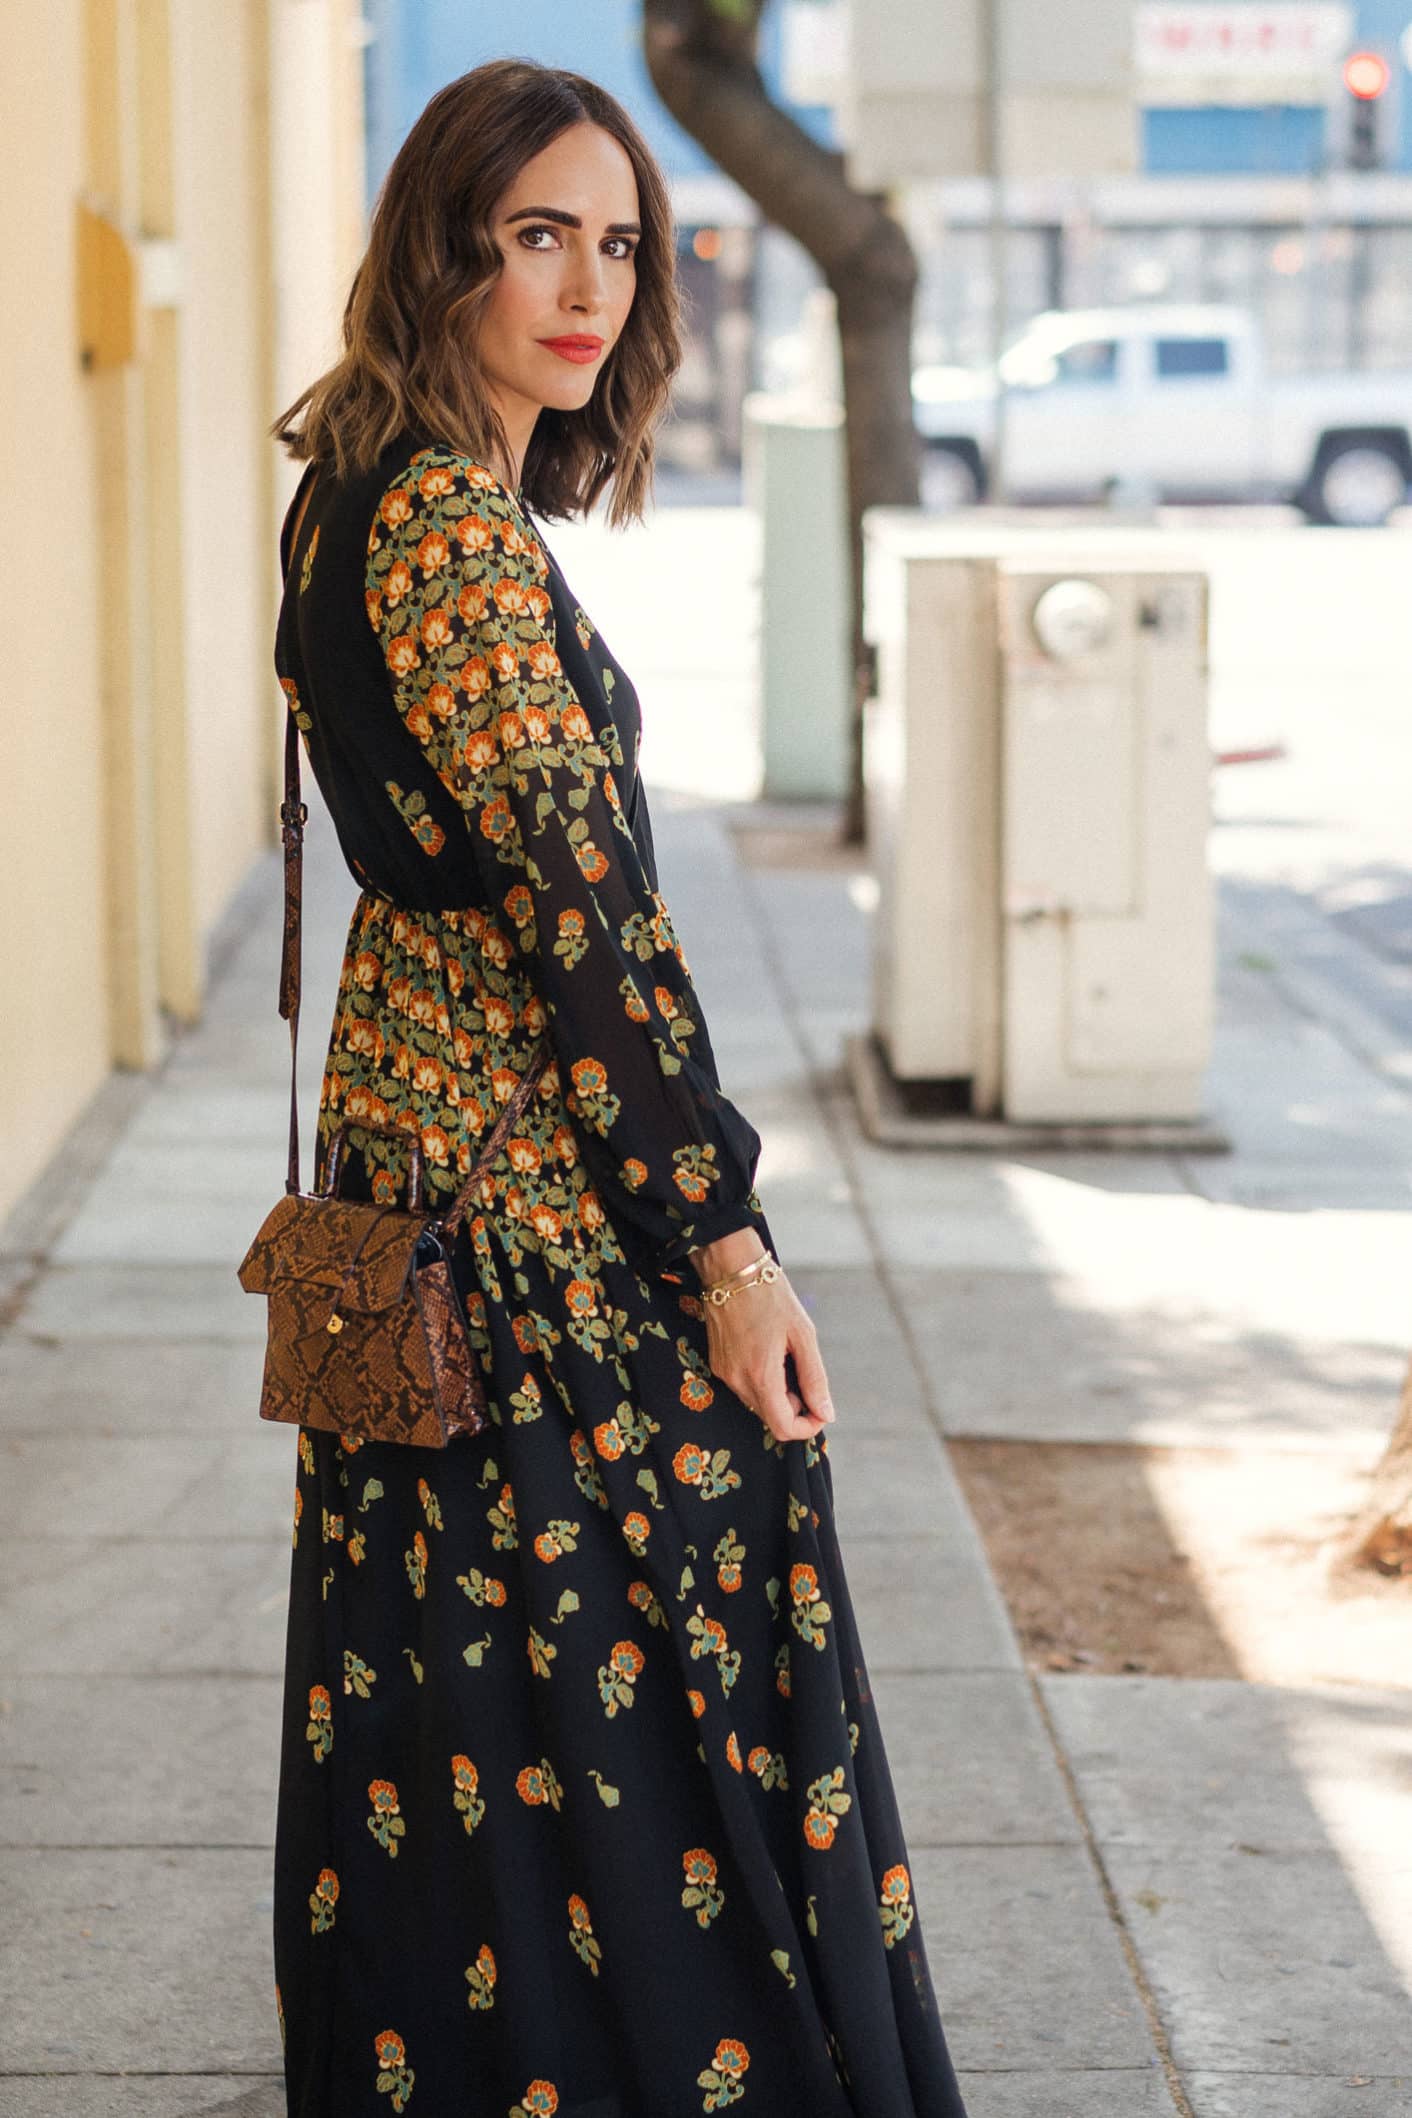 Easy Fall Fashion - Front Roe by Louise Roe